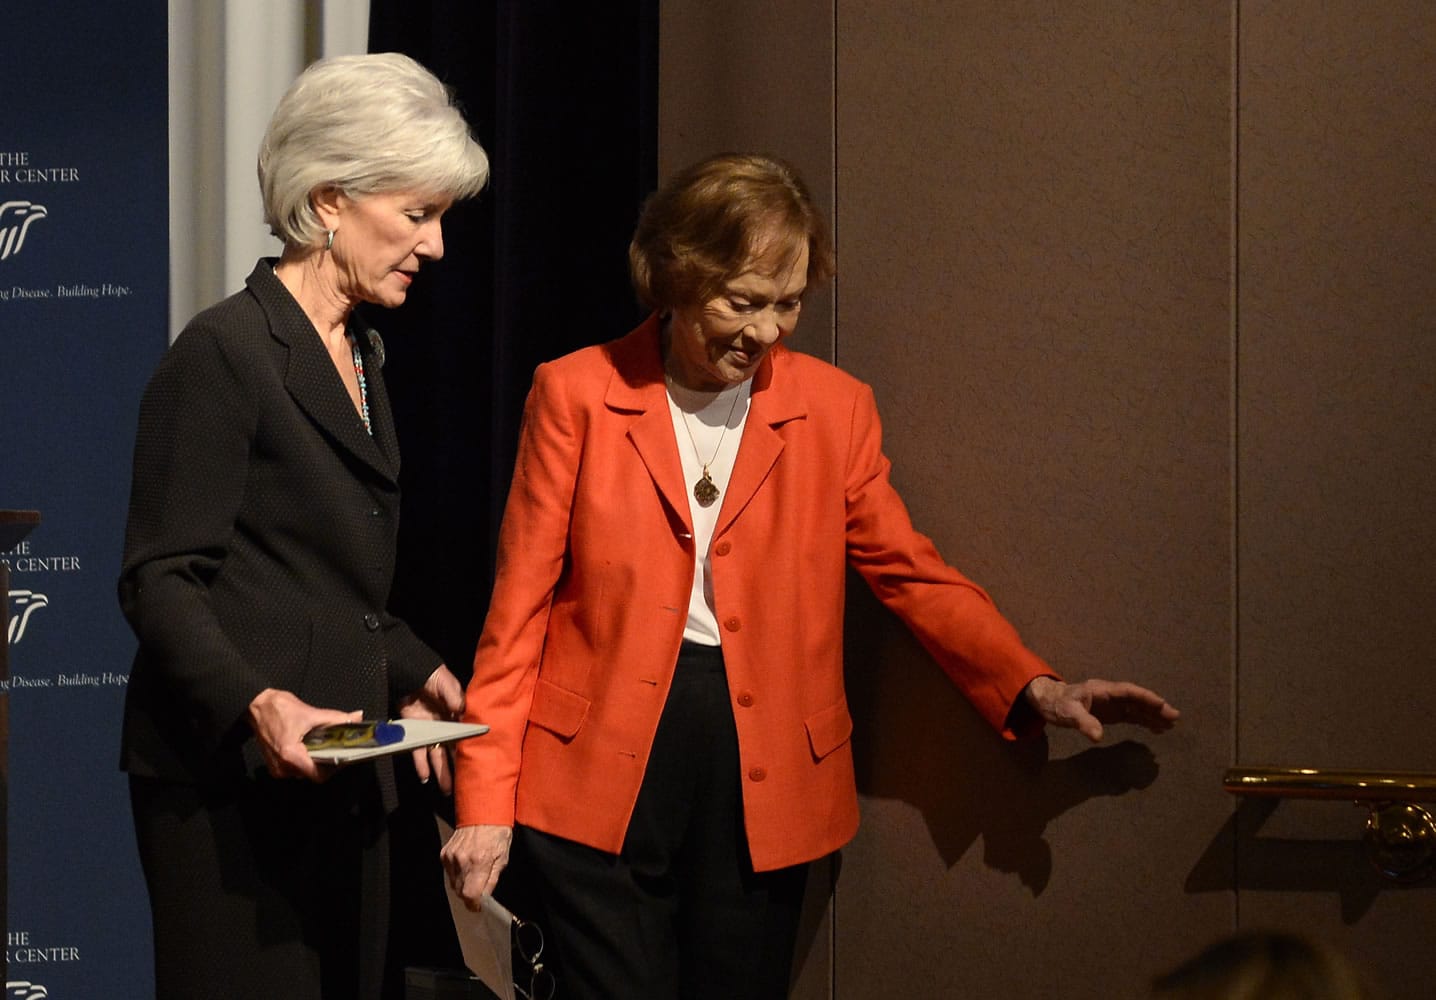 Department of Health and Human Services Secretary Kathleen Sebelius, left, helps former first lady Rosalynn Carter down the stairs at the 29th annual mental health policy symposium at the Carter Center on Friday in Atlanta.